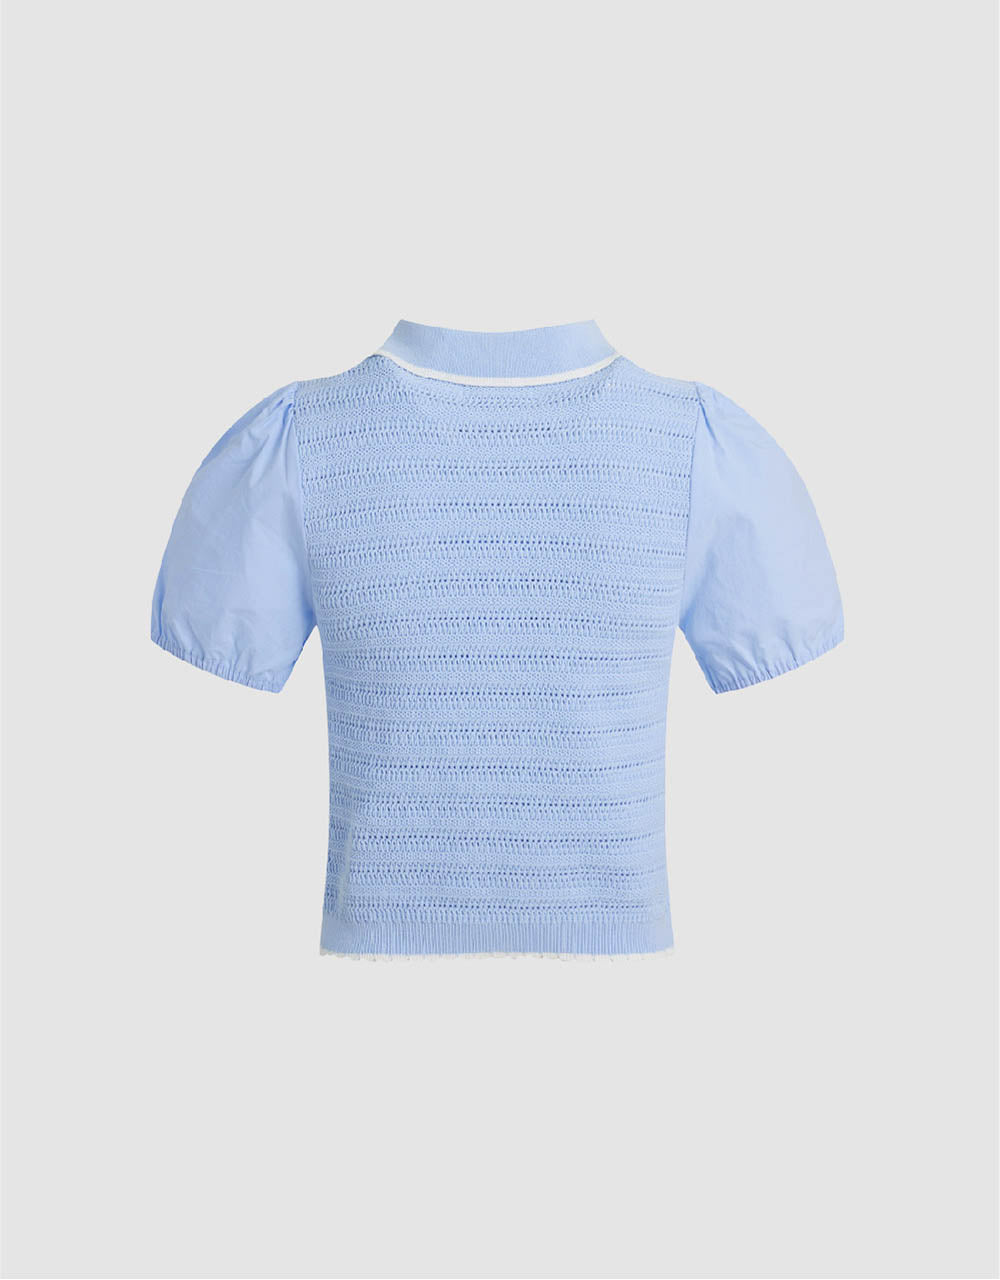 Two Toned Knitted T-Shirt